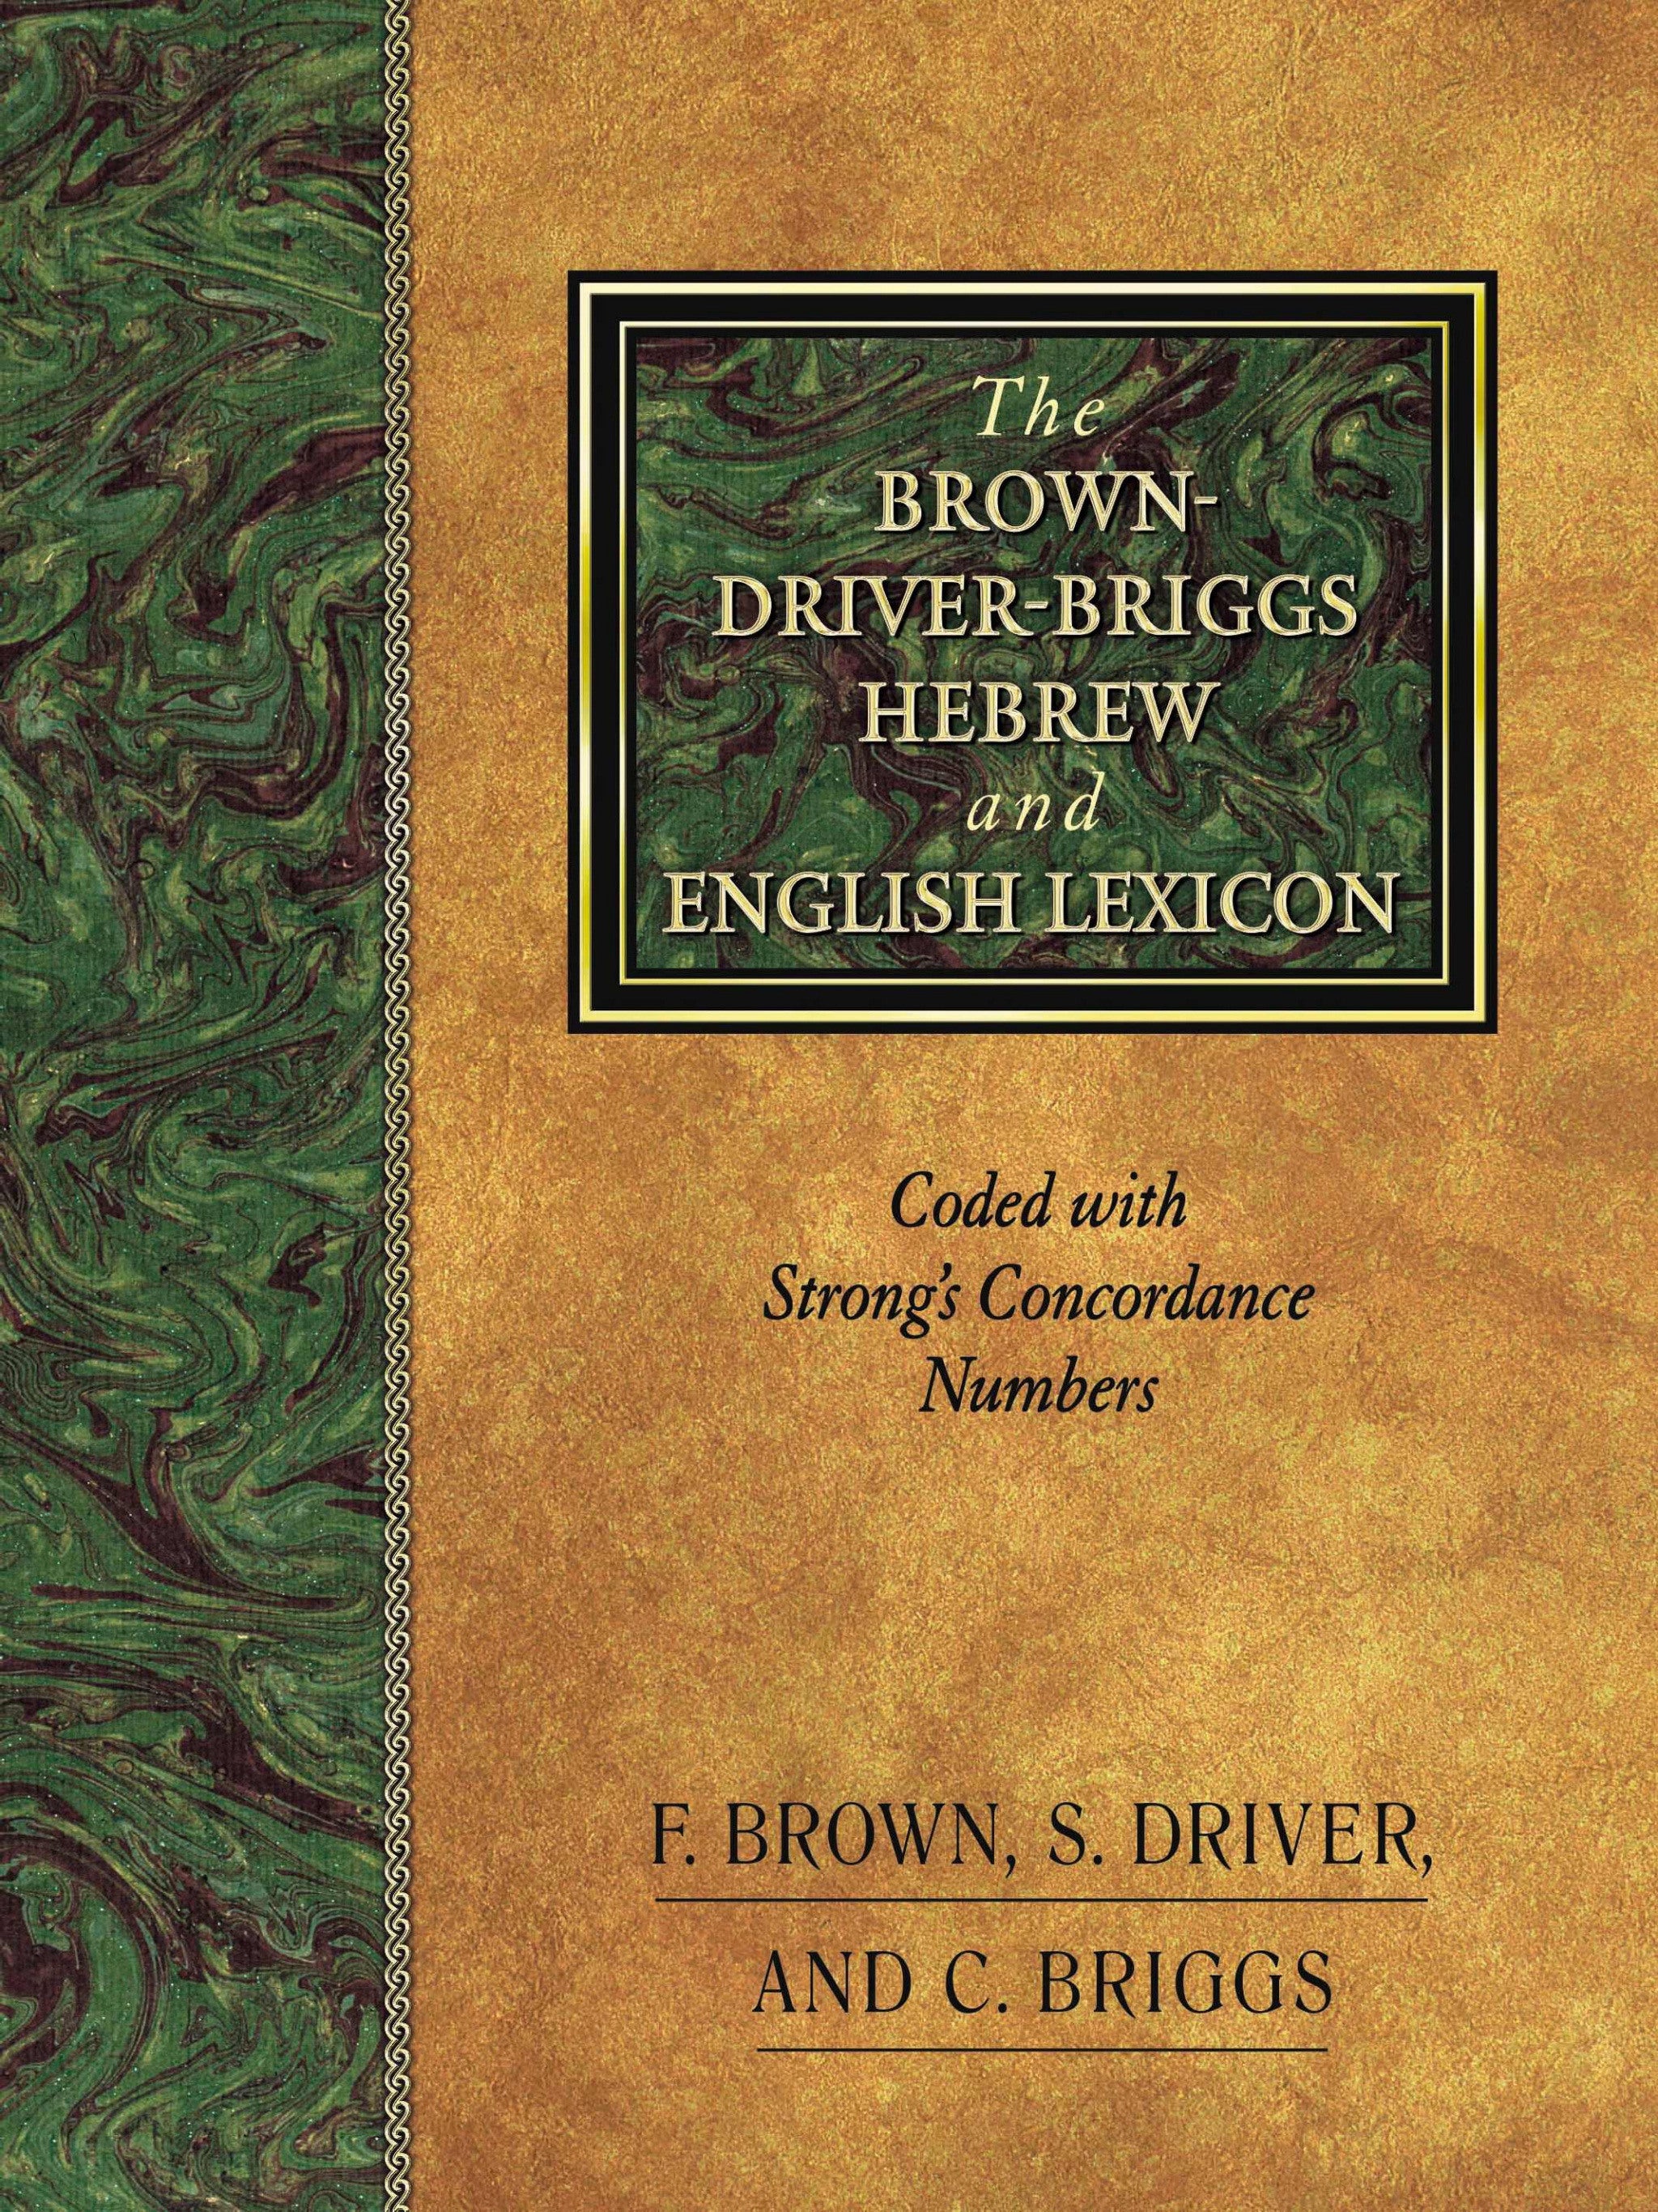 Image of The Brown-Driver-Briggs Hebrew-English Lexicon other